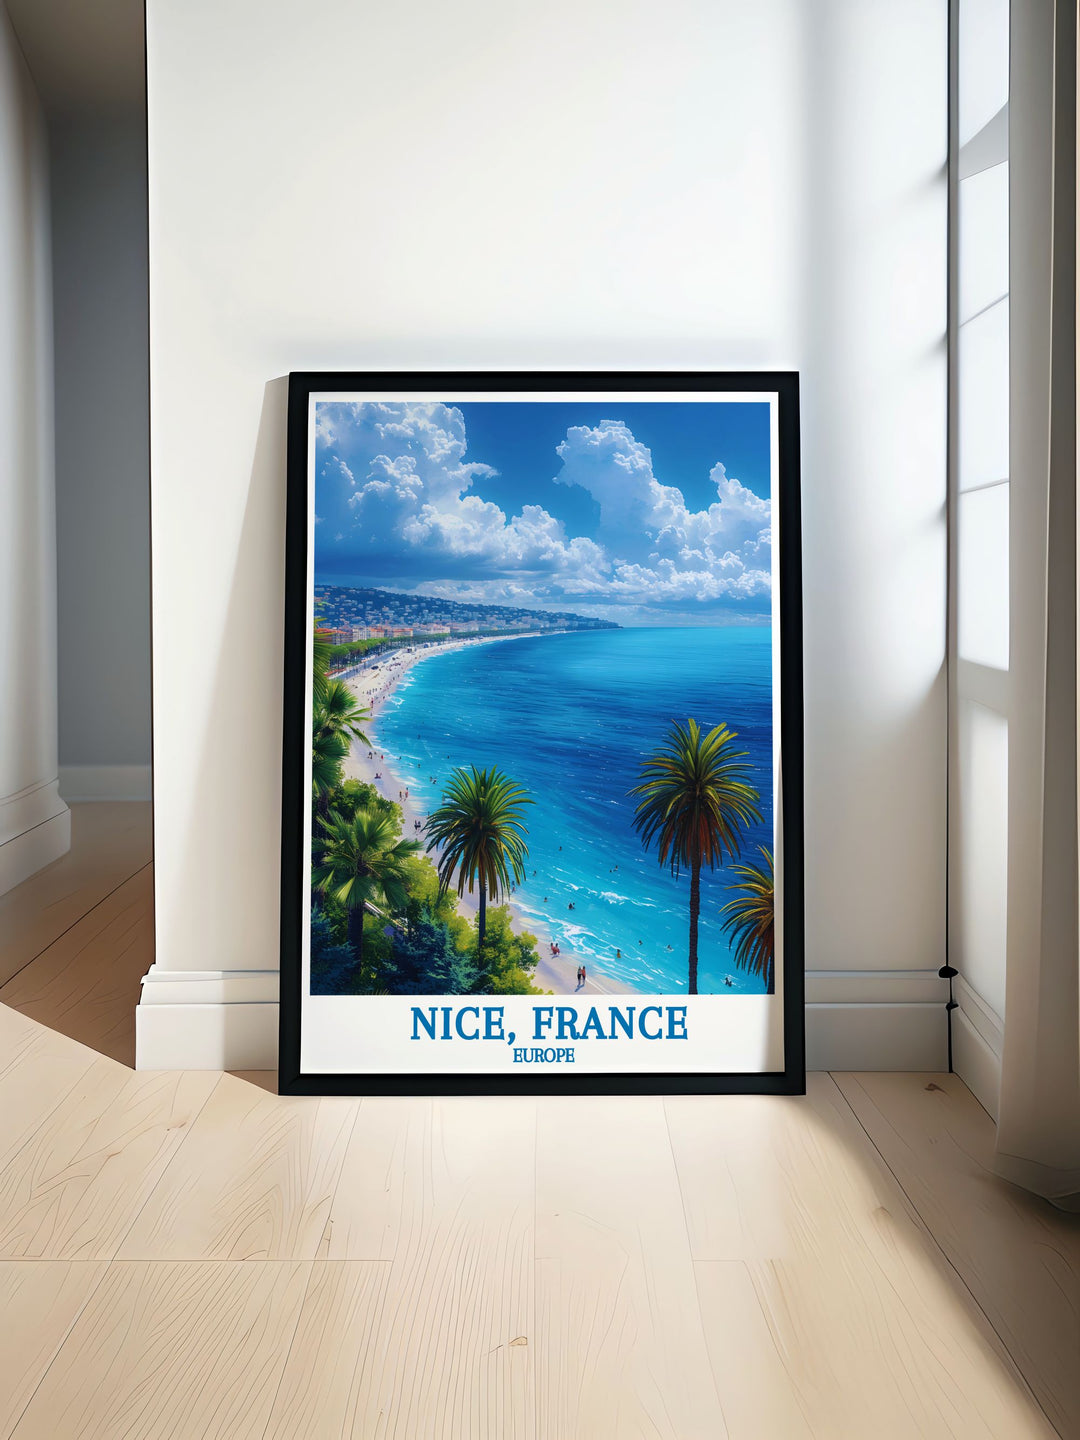 This art print beautifully depicts the lively Promenade des Anglais in Nice, France, capturing the dynamic energy, architectural splendor, and serene ambiance of this historic seafront.